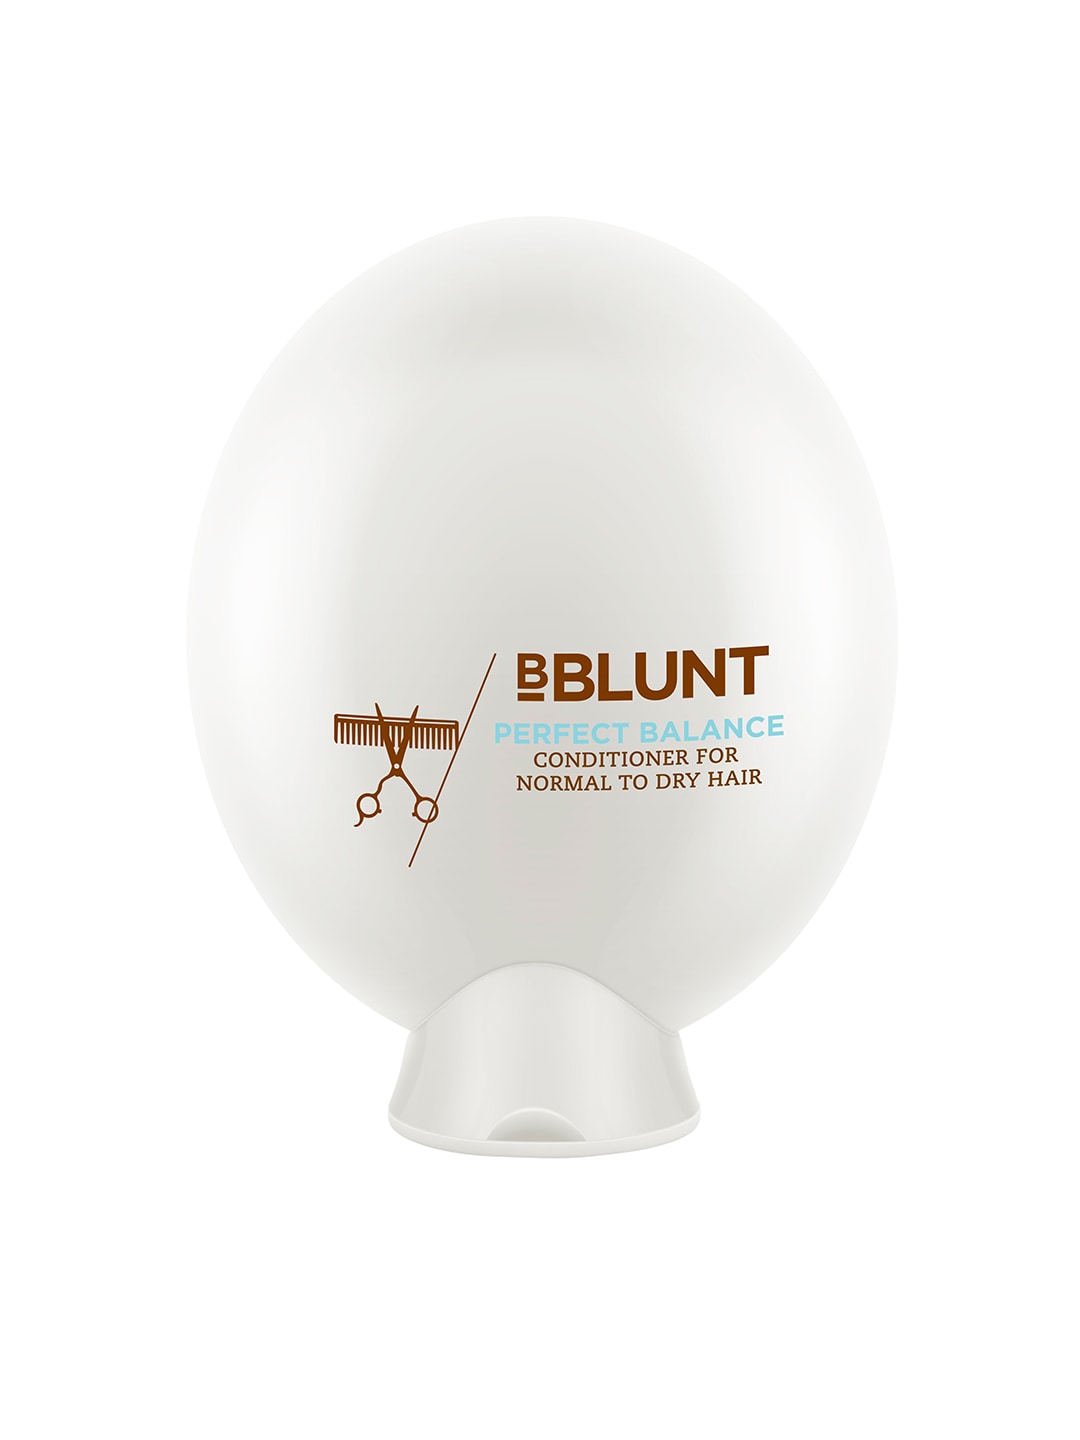 BBLUNT Perfect Balance Conditioner For Normal To Dry Hair 200 g Price in India